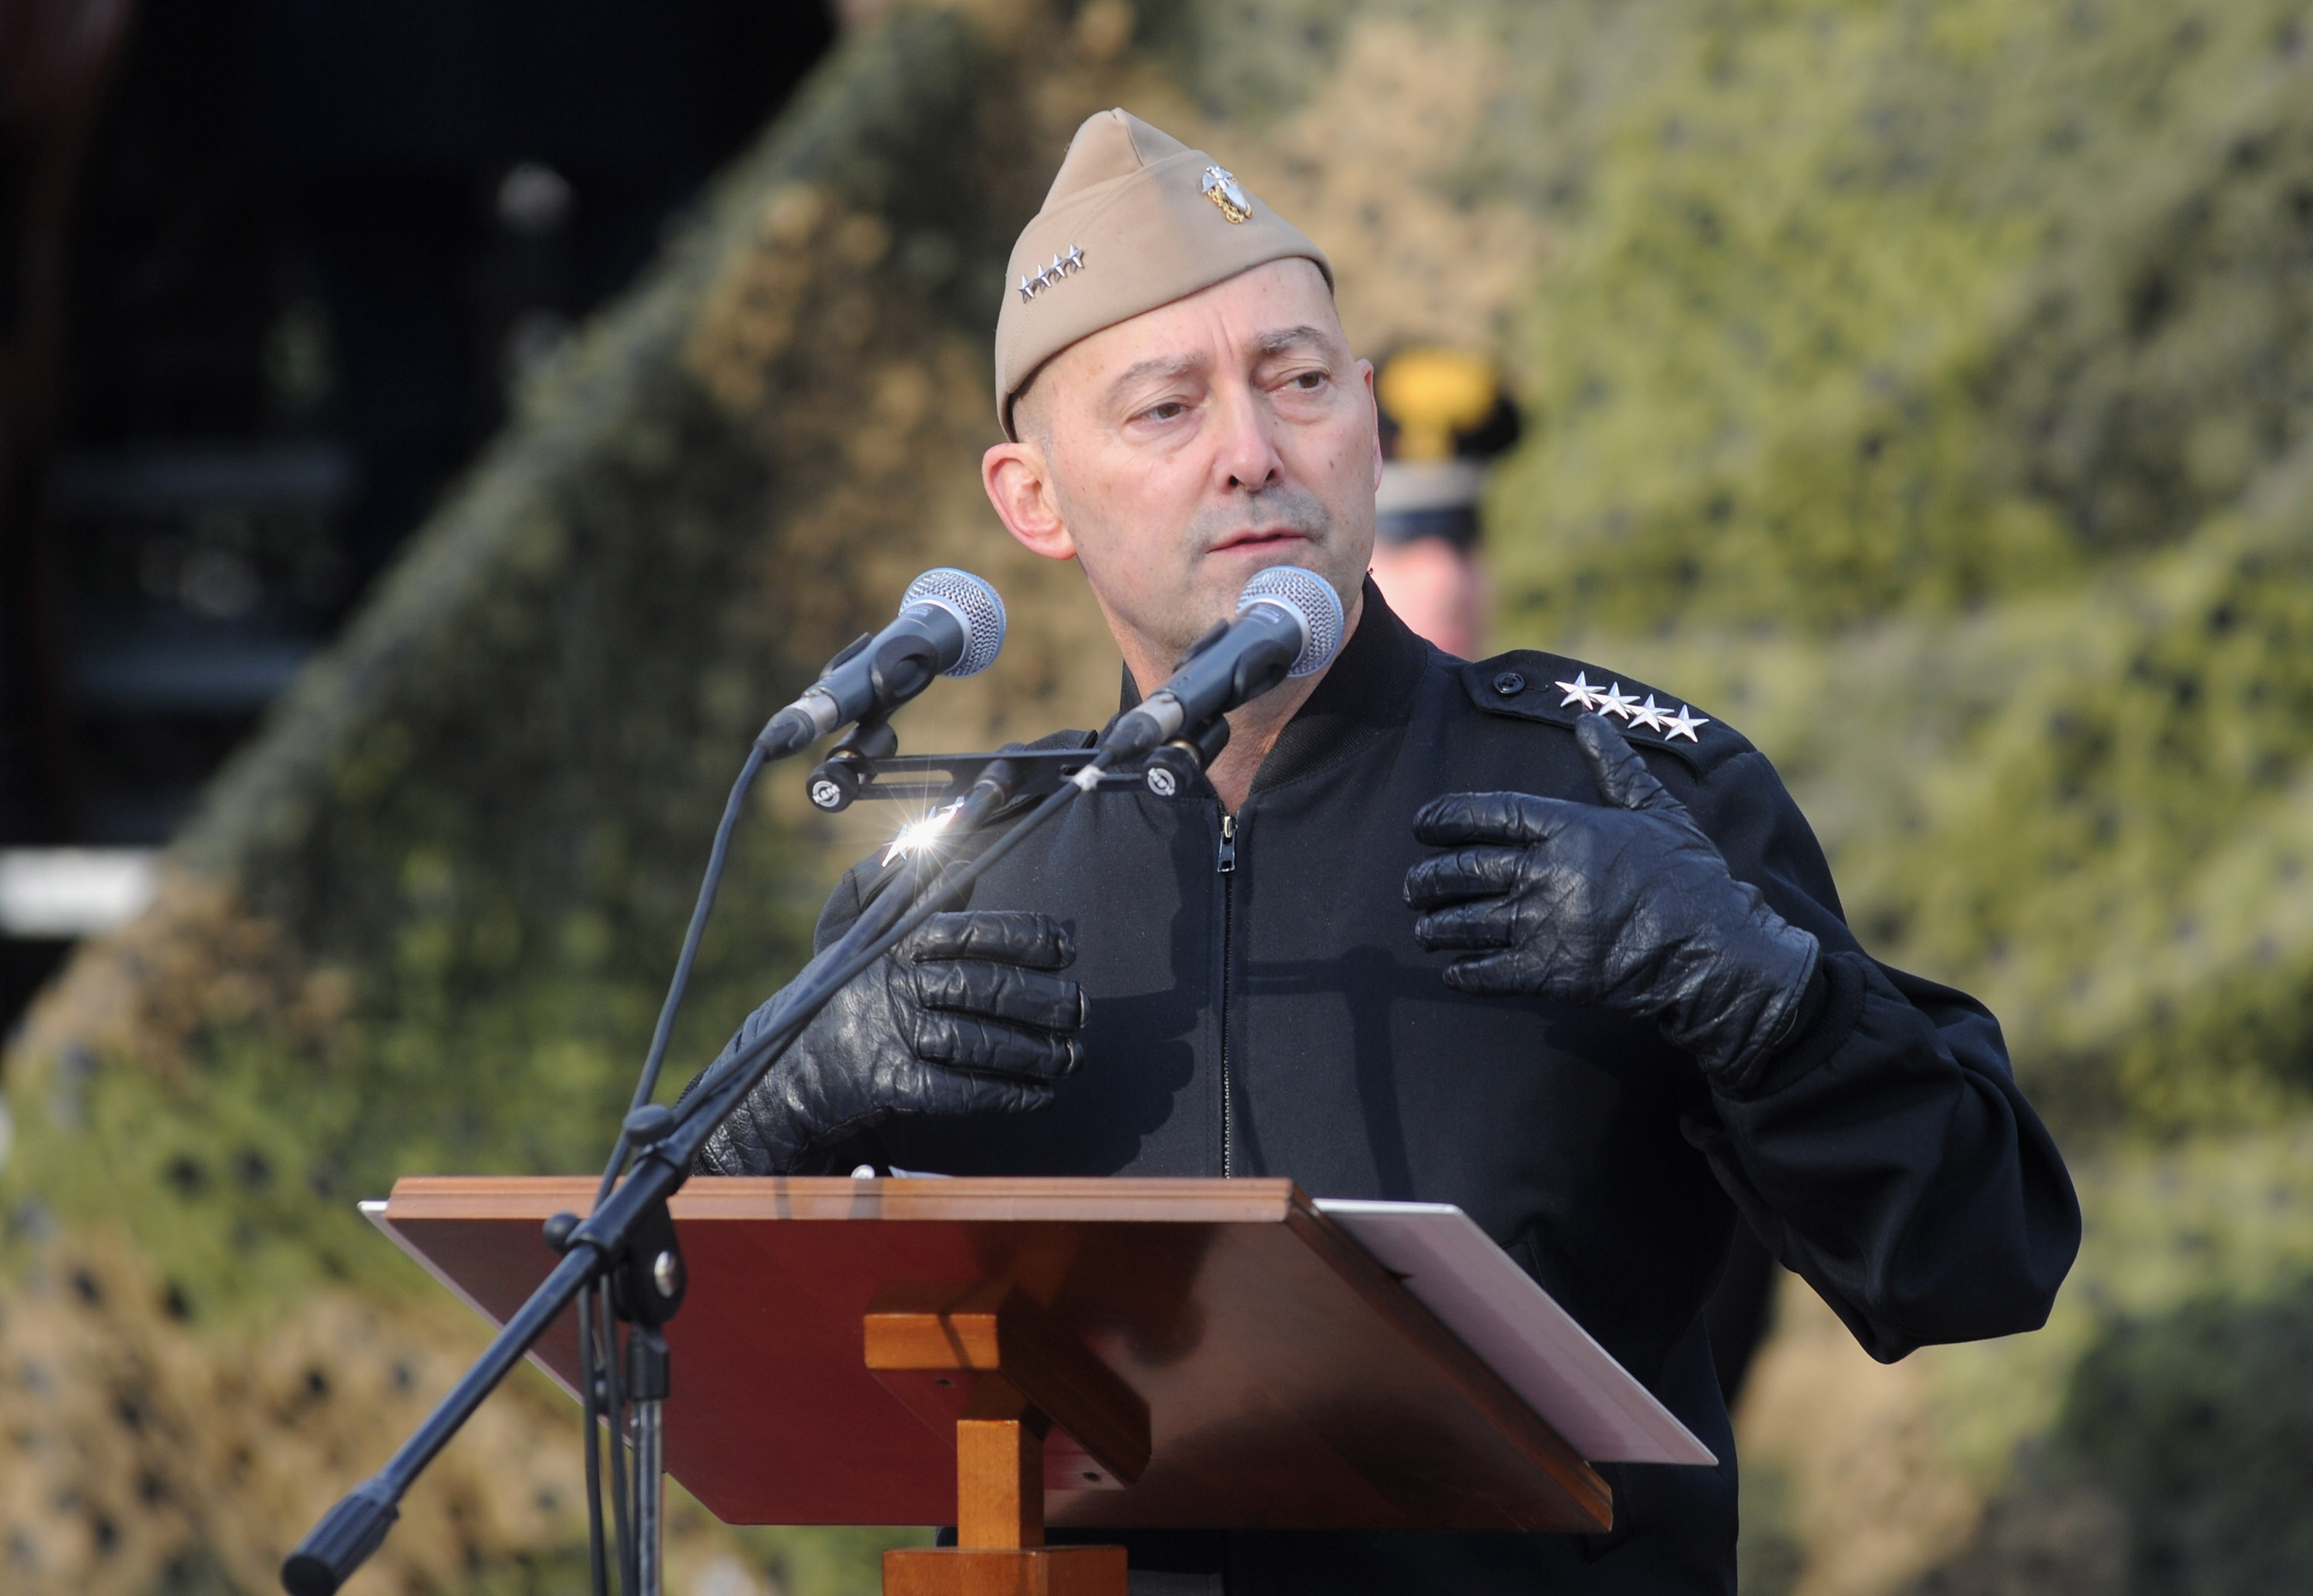 Former Supreme Allied Commander Europe Admiral James Stavridis makes a speech at the departure Ceremony for OTAN Rapid Deployable Corps - Italy bound for Afghanistan at Ugo Mara Barracks in Solbiate Olona, Italy, on Jan. 10, 2013. (Pier Marco Tacca—Getty Images)